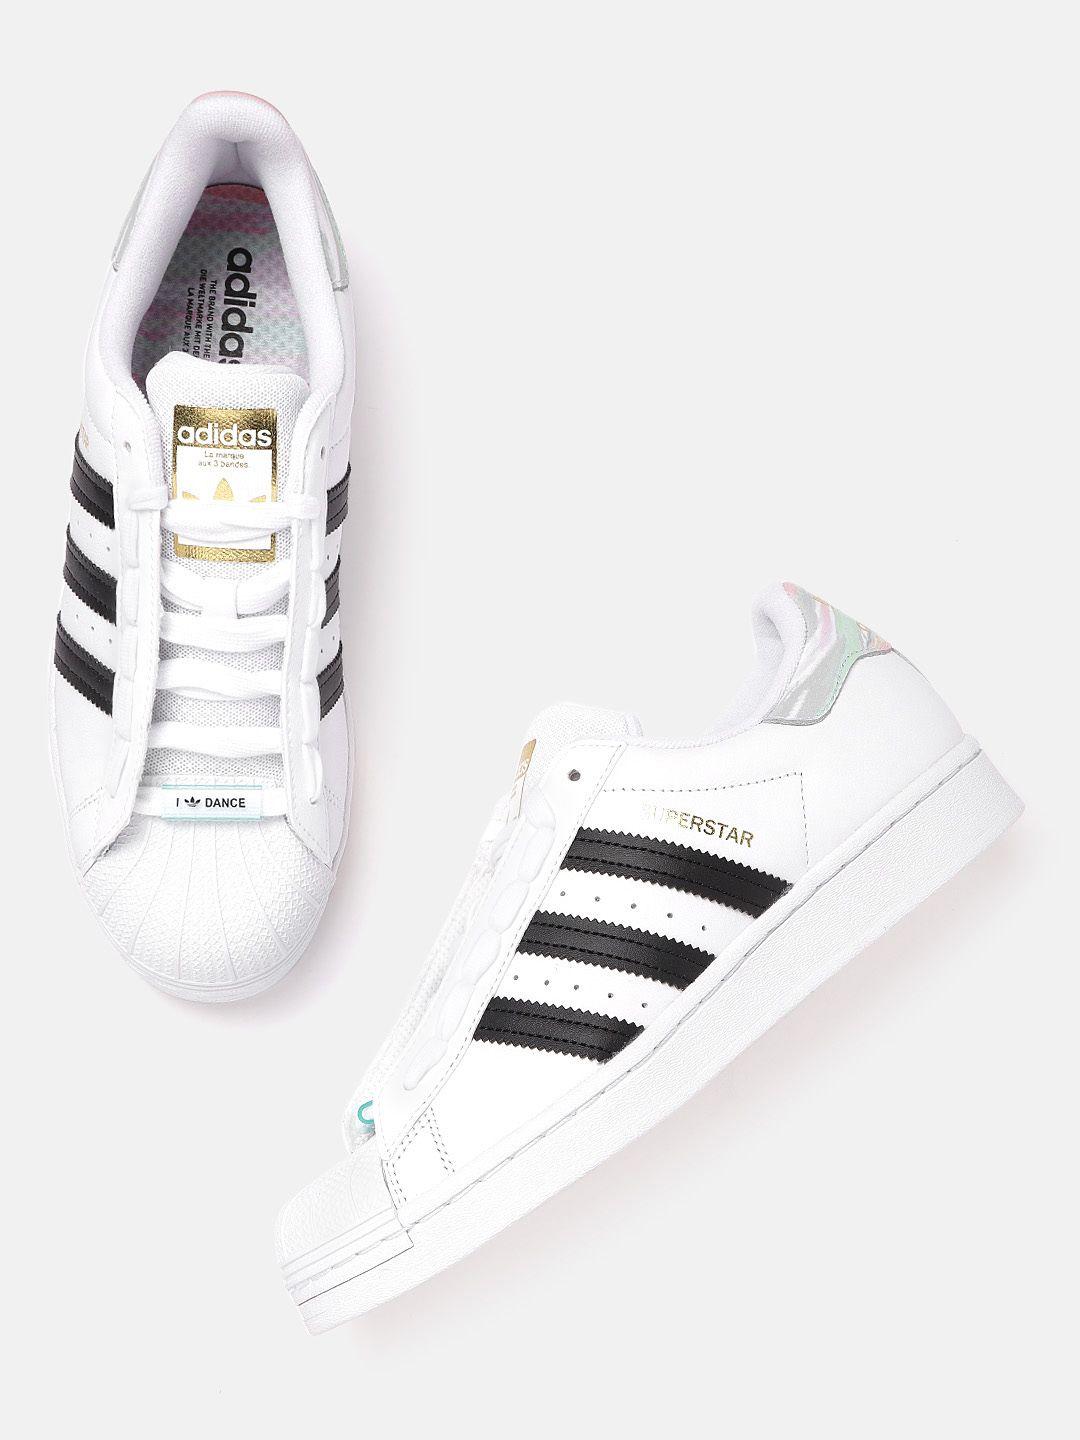 adidas-originals-women-white-solid-leather-excluding-trimmings-superstar-sneakers